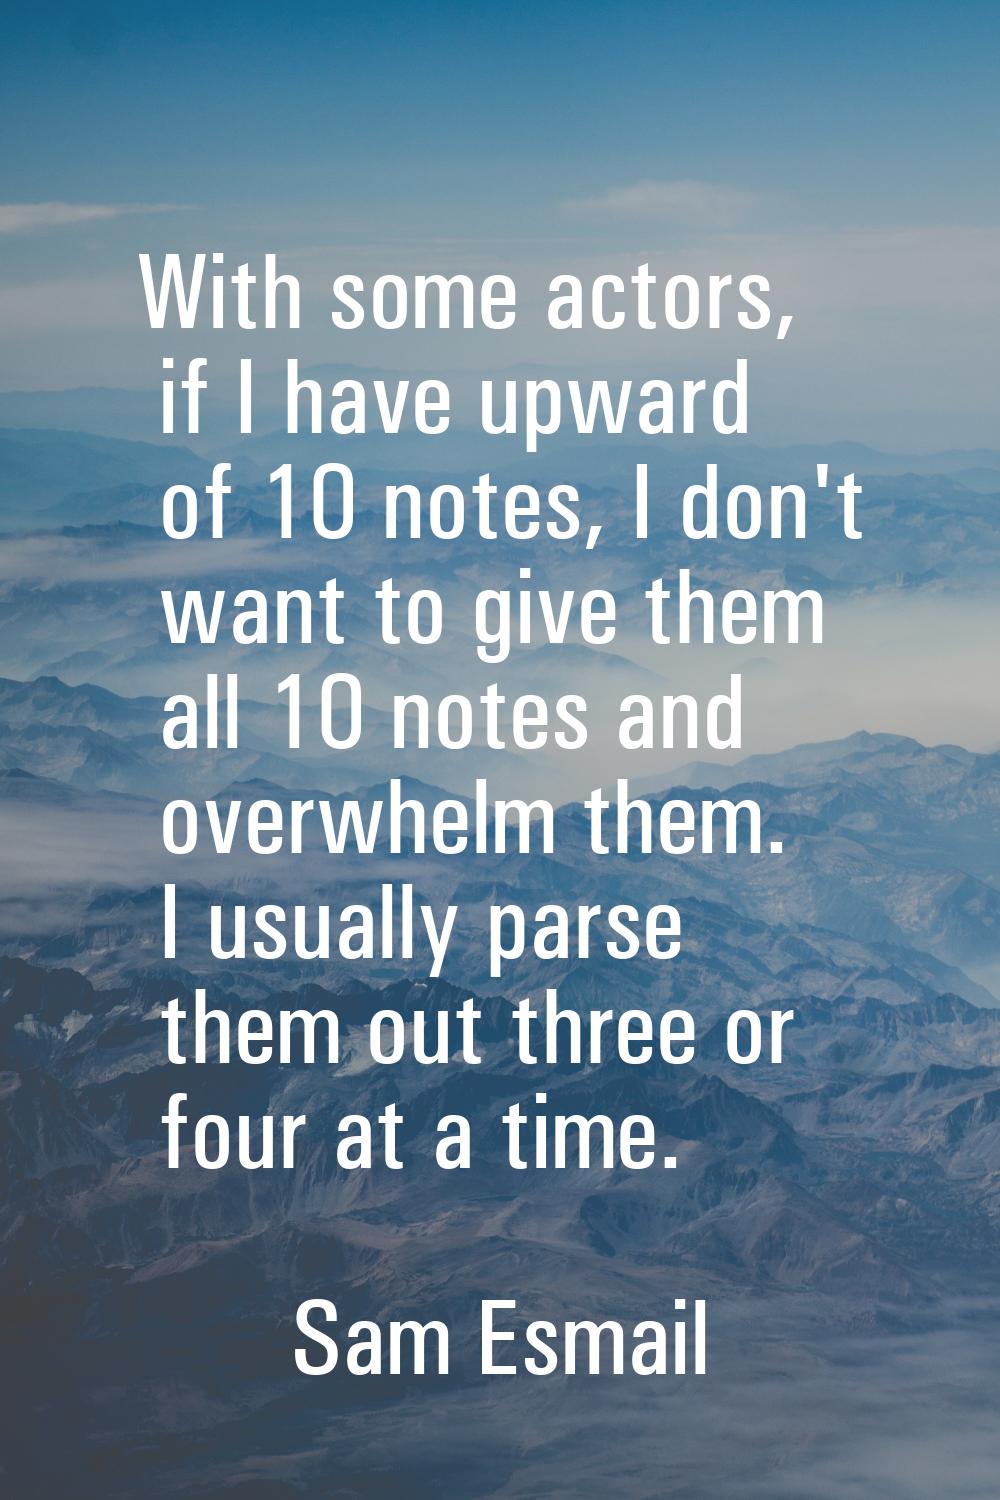 With some actors, if I have upward of 10 notes, I don't want to give them all 10 notes and overwhel